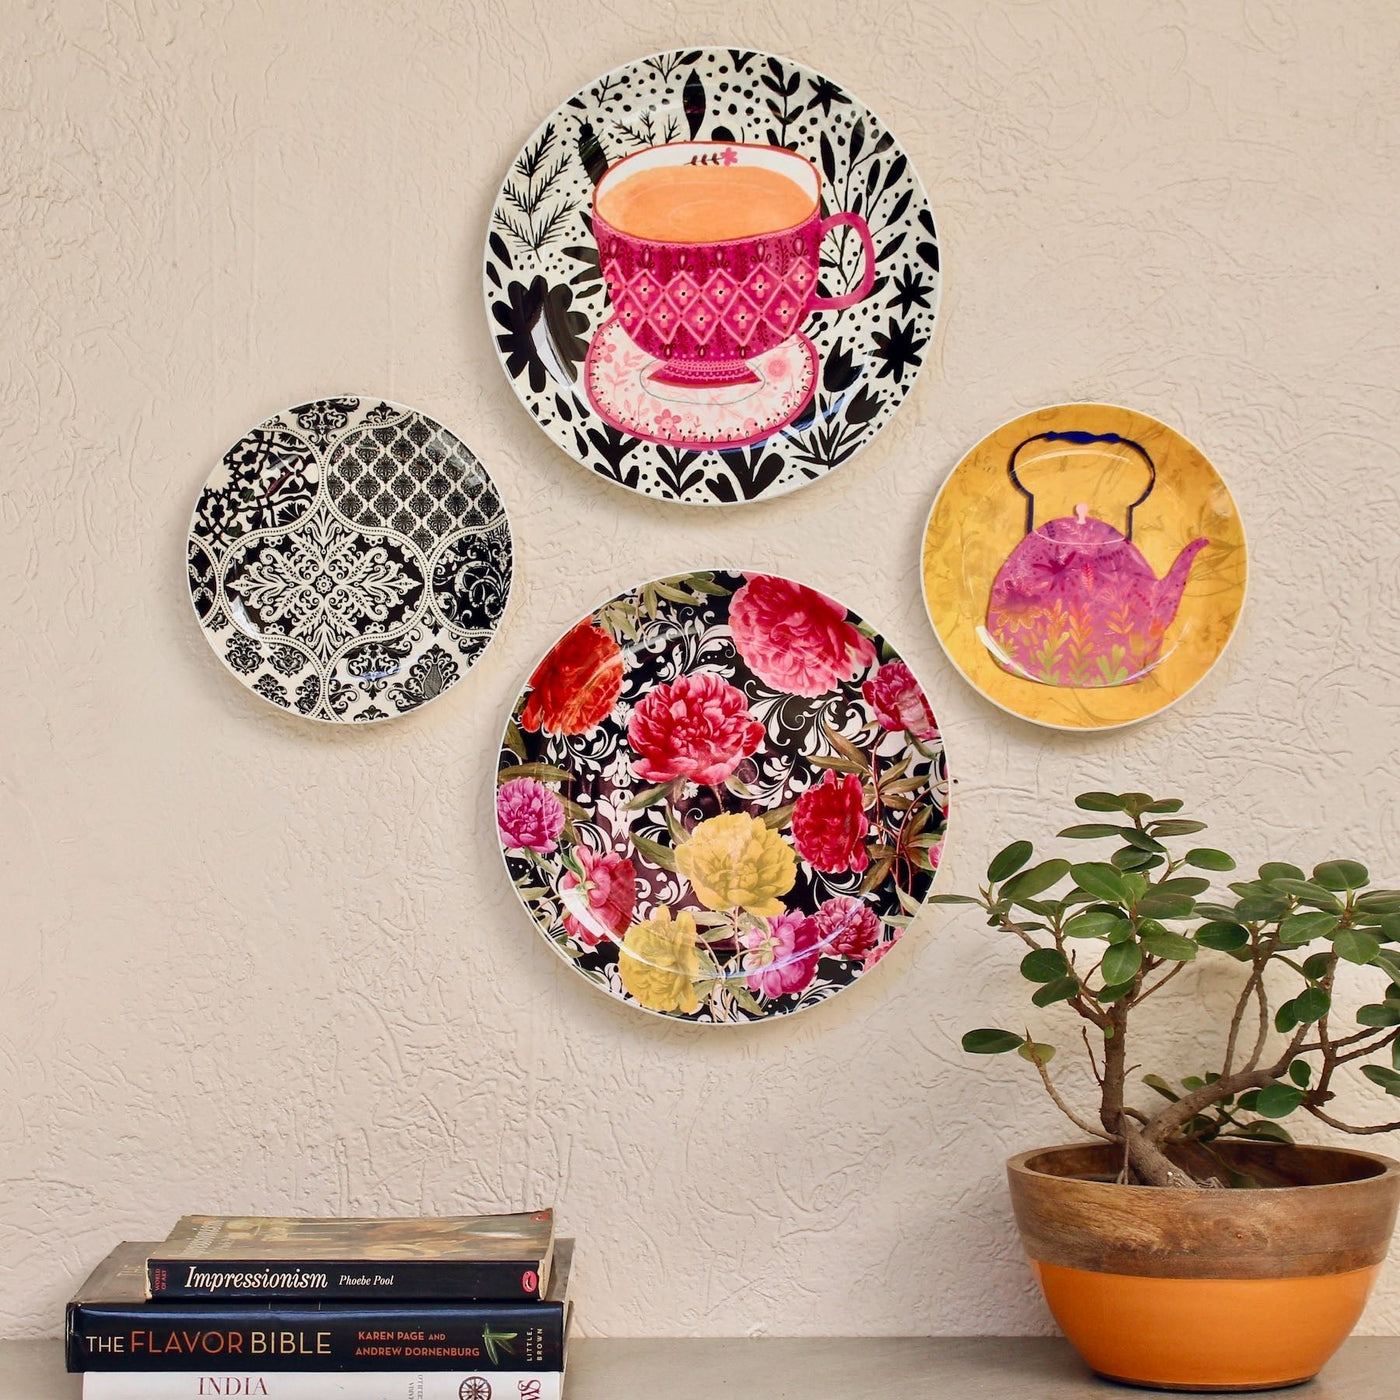 Black and white decorative wall plates